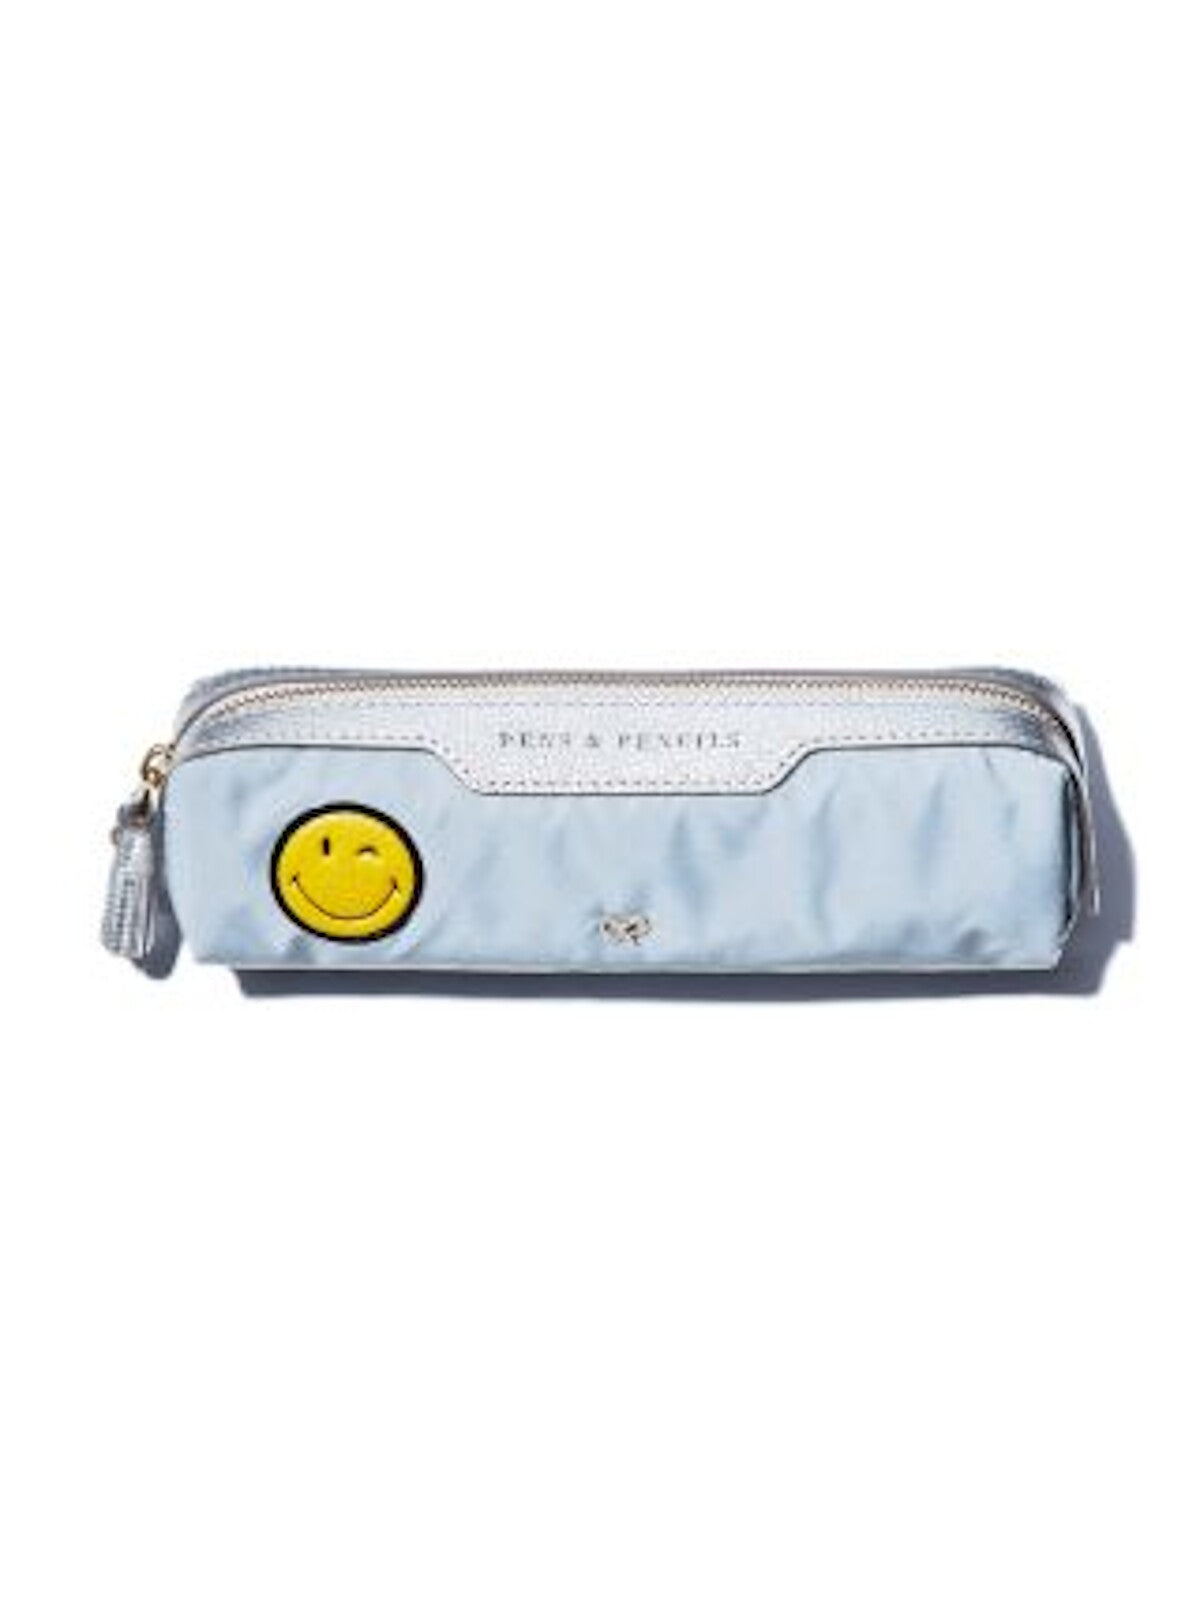 Anya Hindmarch Women's Silver Logo Nylon Pens And Pencils Case Strapless Micro Bag